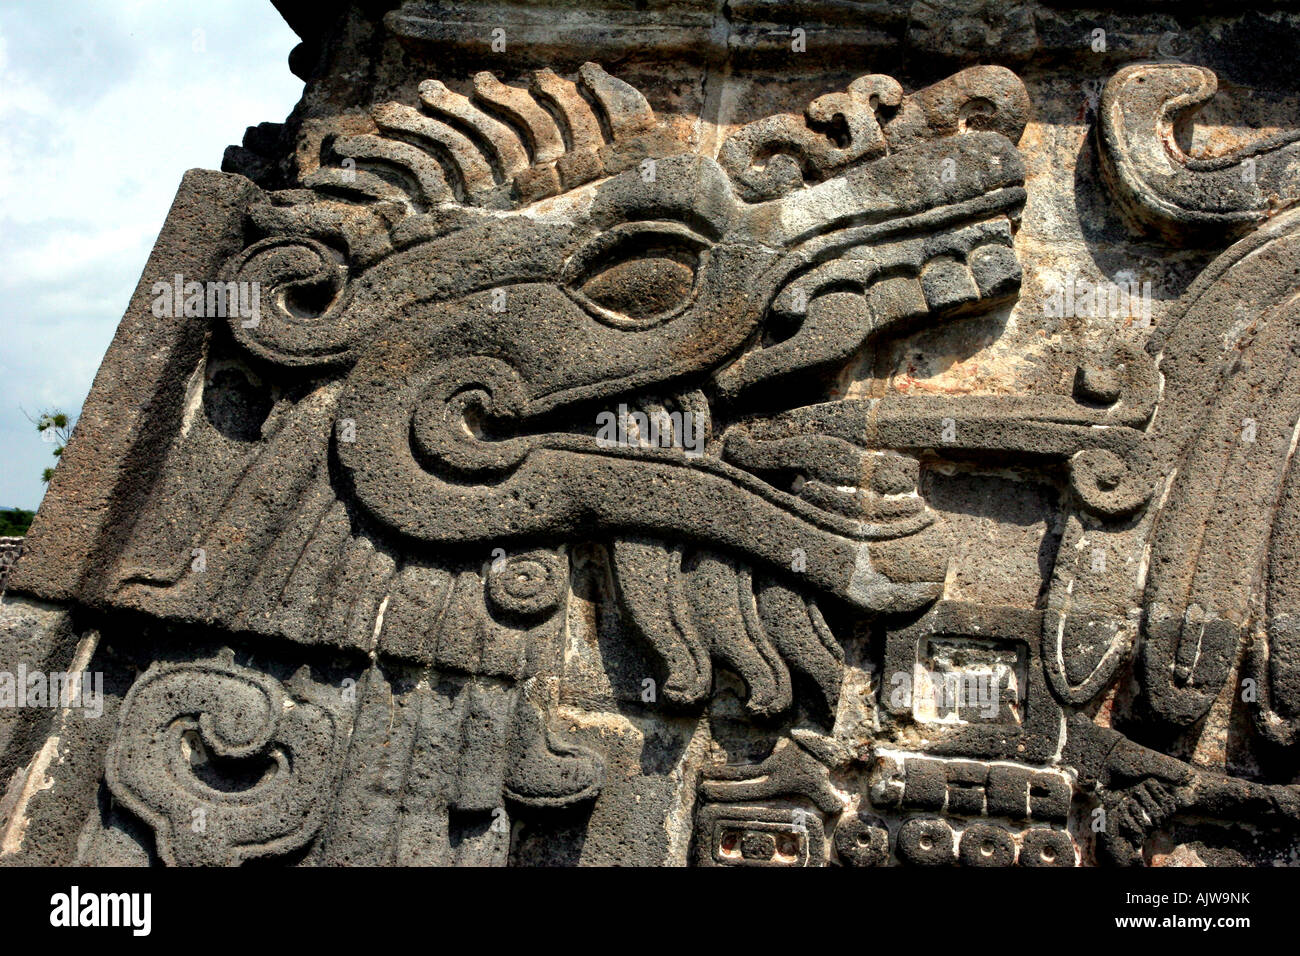 Ancient stone serpent deity carving/sculpture on a Mayan pyramid at Xochicalco archeological site. Stock Photo